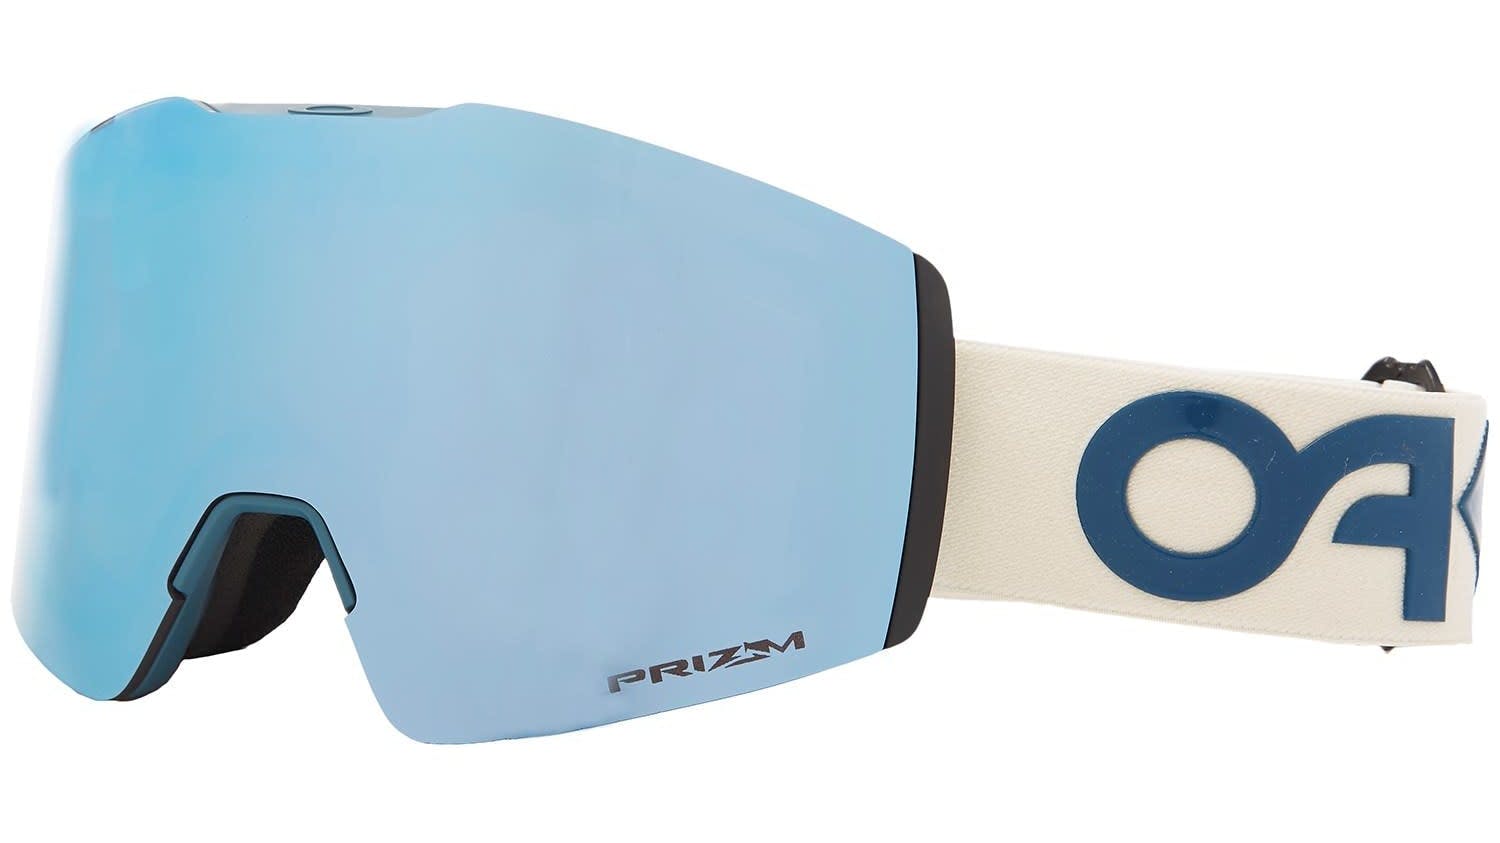 A pair of ski goggles with a blue lens and a white strap